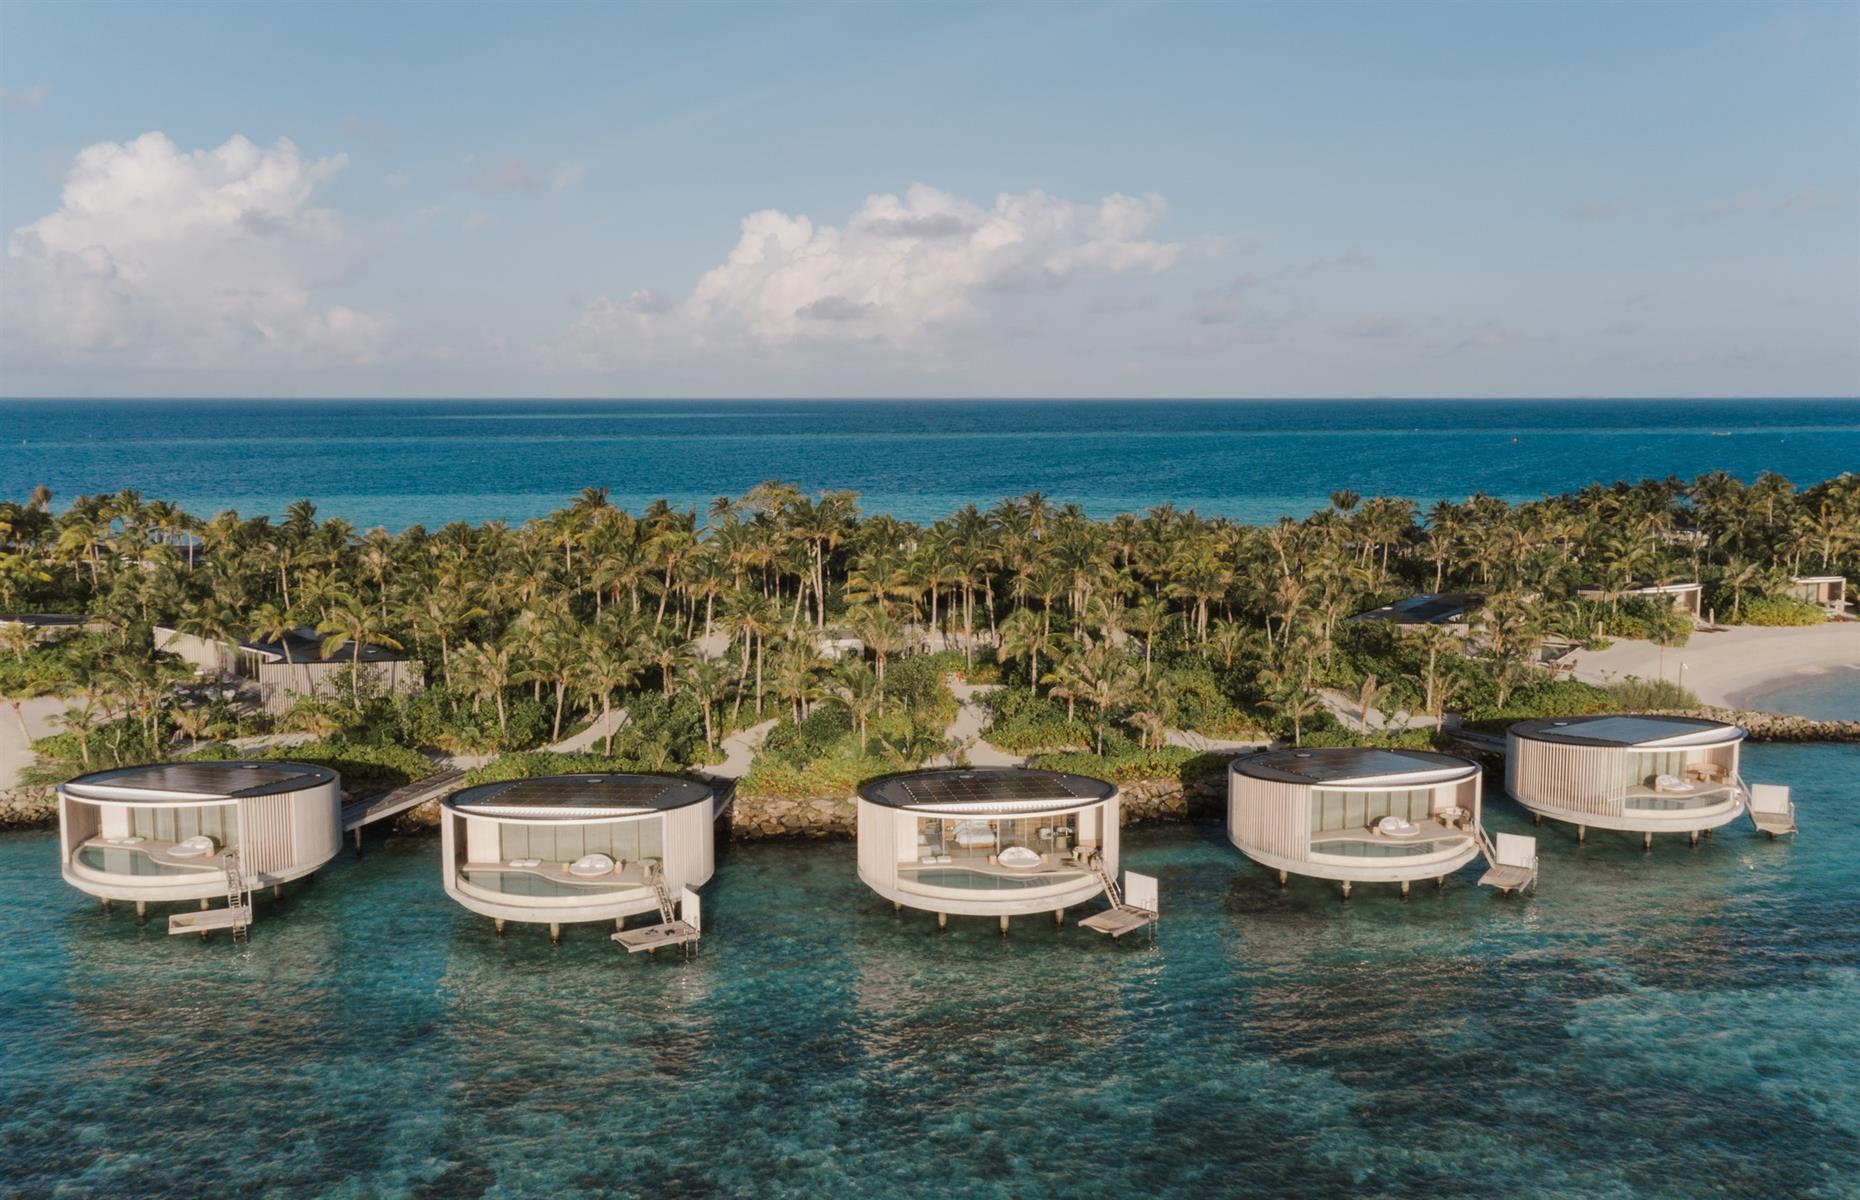 <p>The circular spa is set over the ocean too – here you can indulge in ultra-luxe treatments, from bamboo massages to natural body wraps using Maldivian herbs. There are also seven restaurants and bars, including a fine-dining Japanese option and a more laid-back beach shack with DJ sets. </p>  <p><a href="https://www.loveexploring.com/galleries/72892/the-worlds-tallest-hotels-with-breathtaking-views?page=1"><strong>Love this? Now check out the highest hotel rooms in the world</strong></a></p>